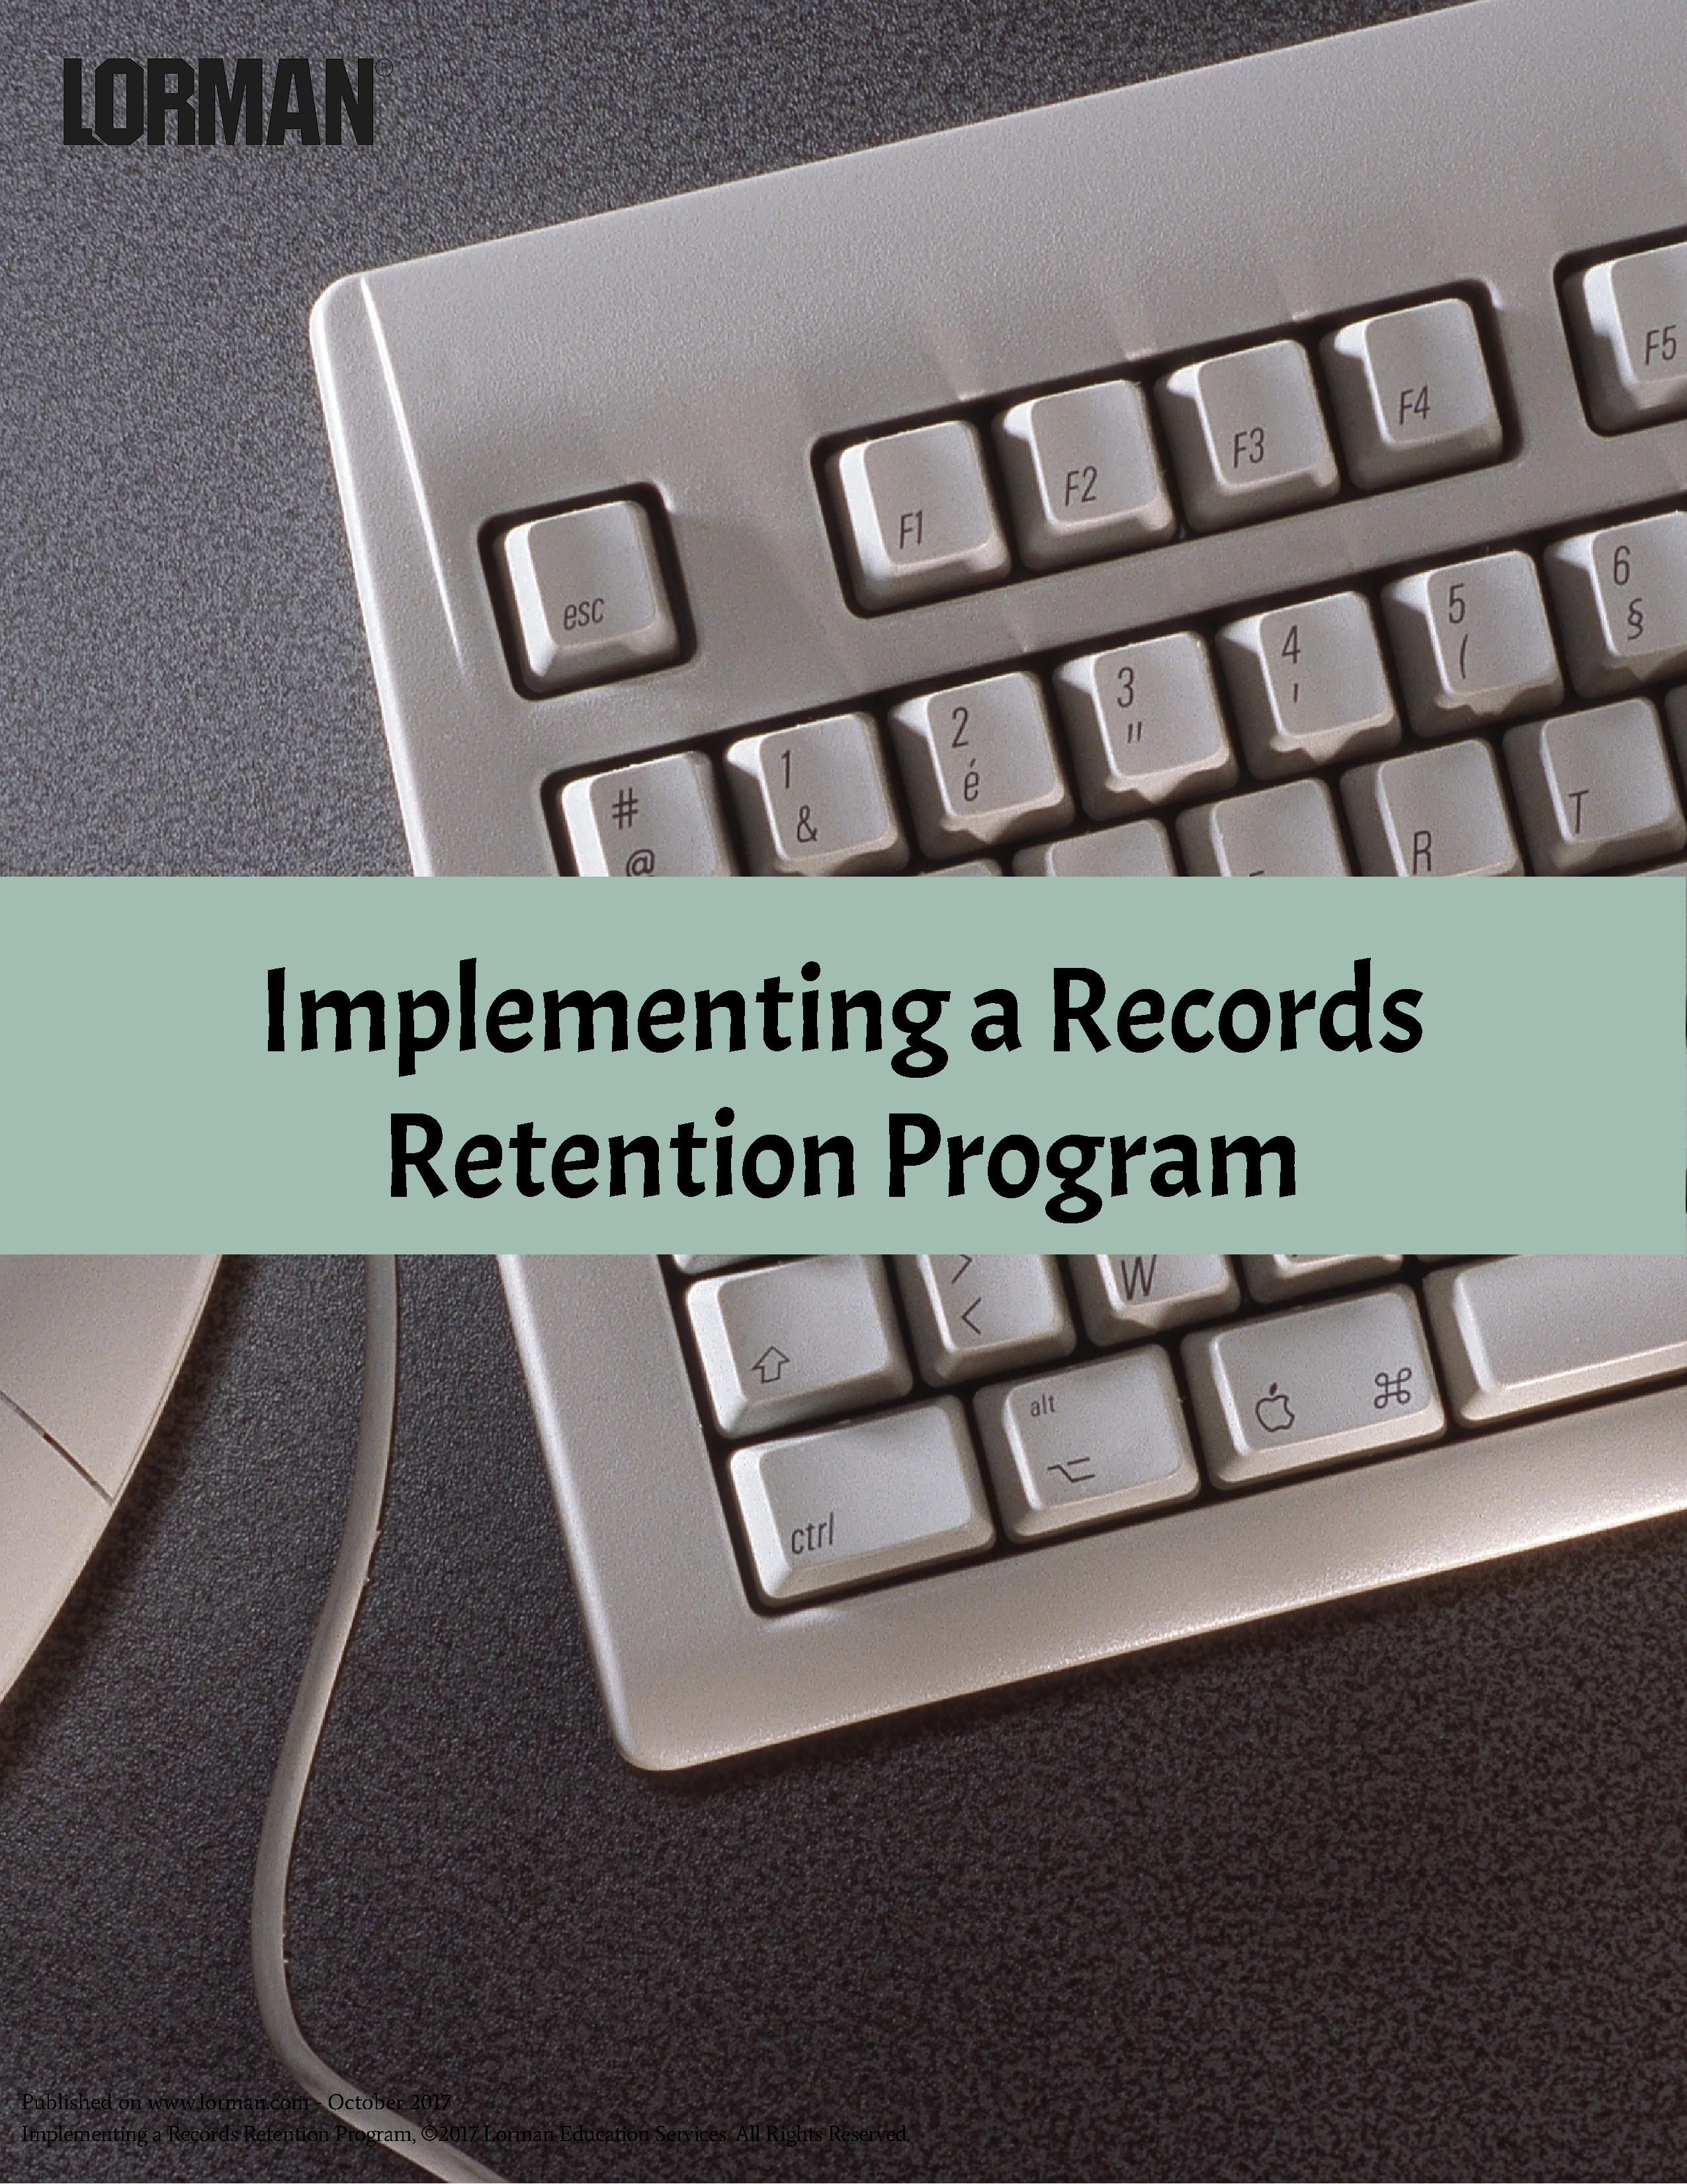 Implementing a Records Retention Program